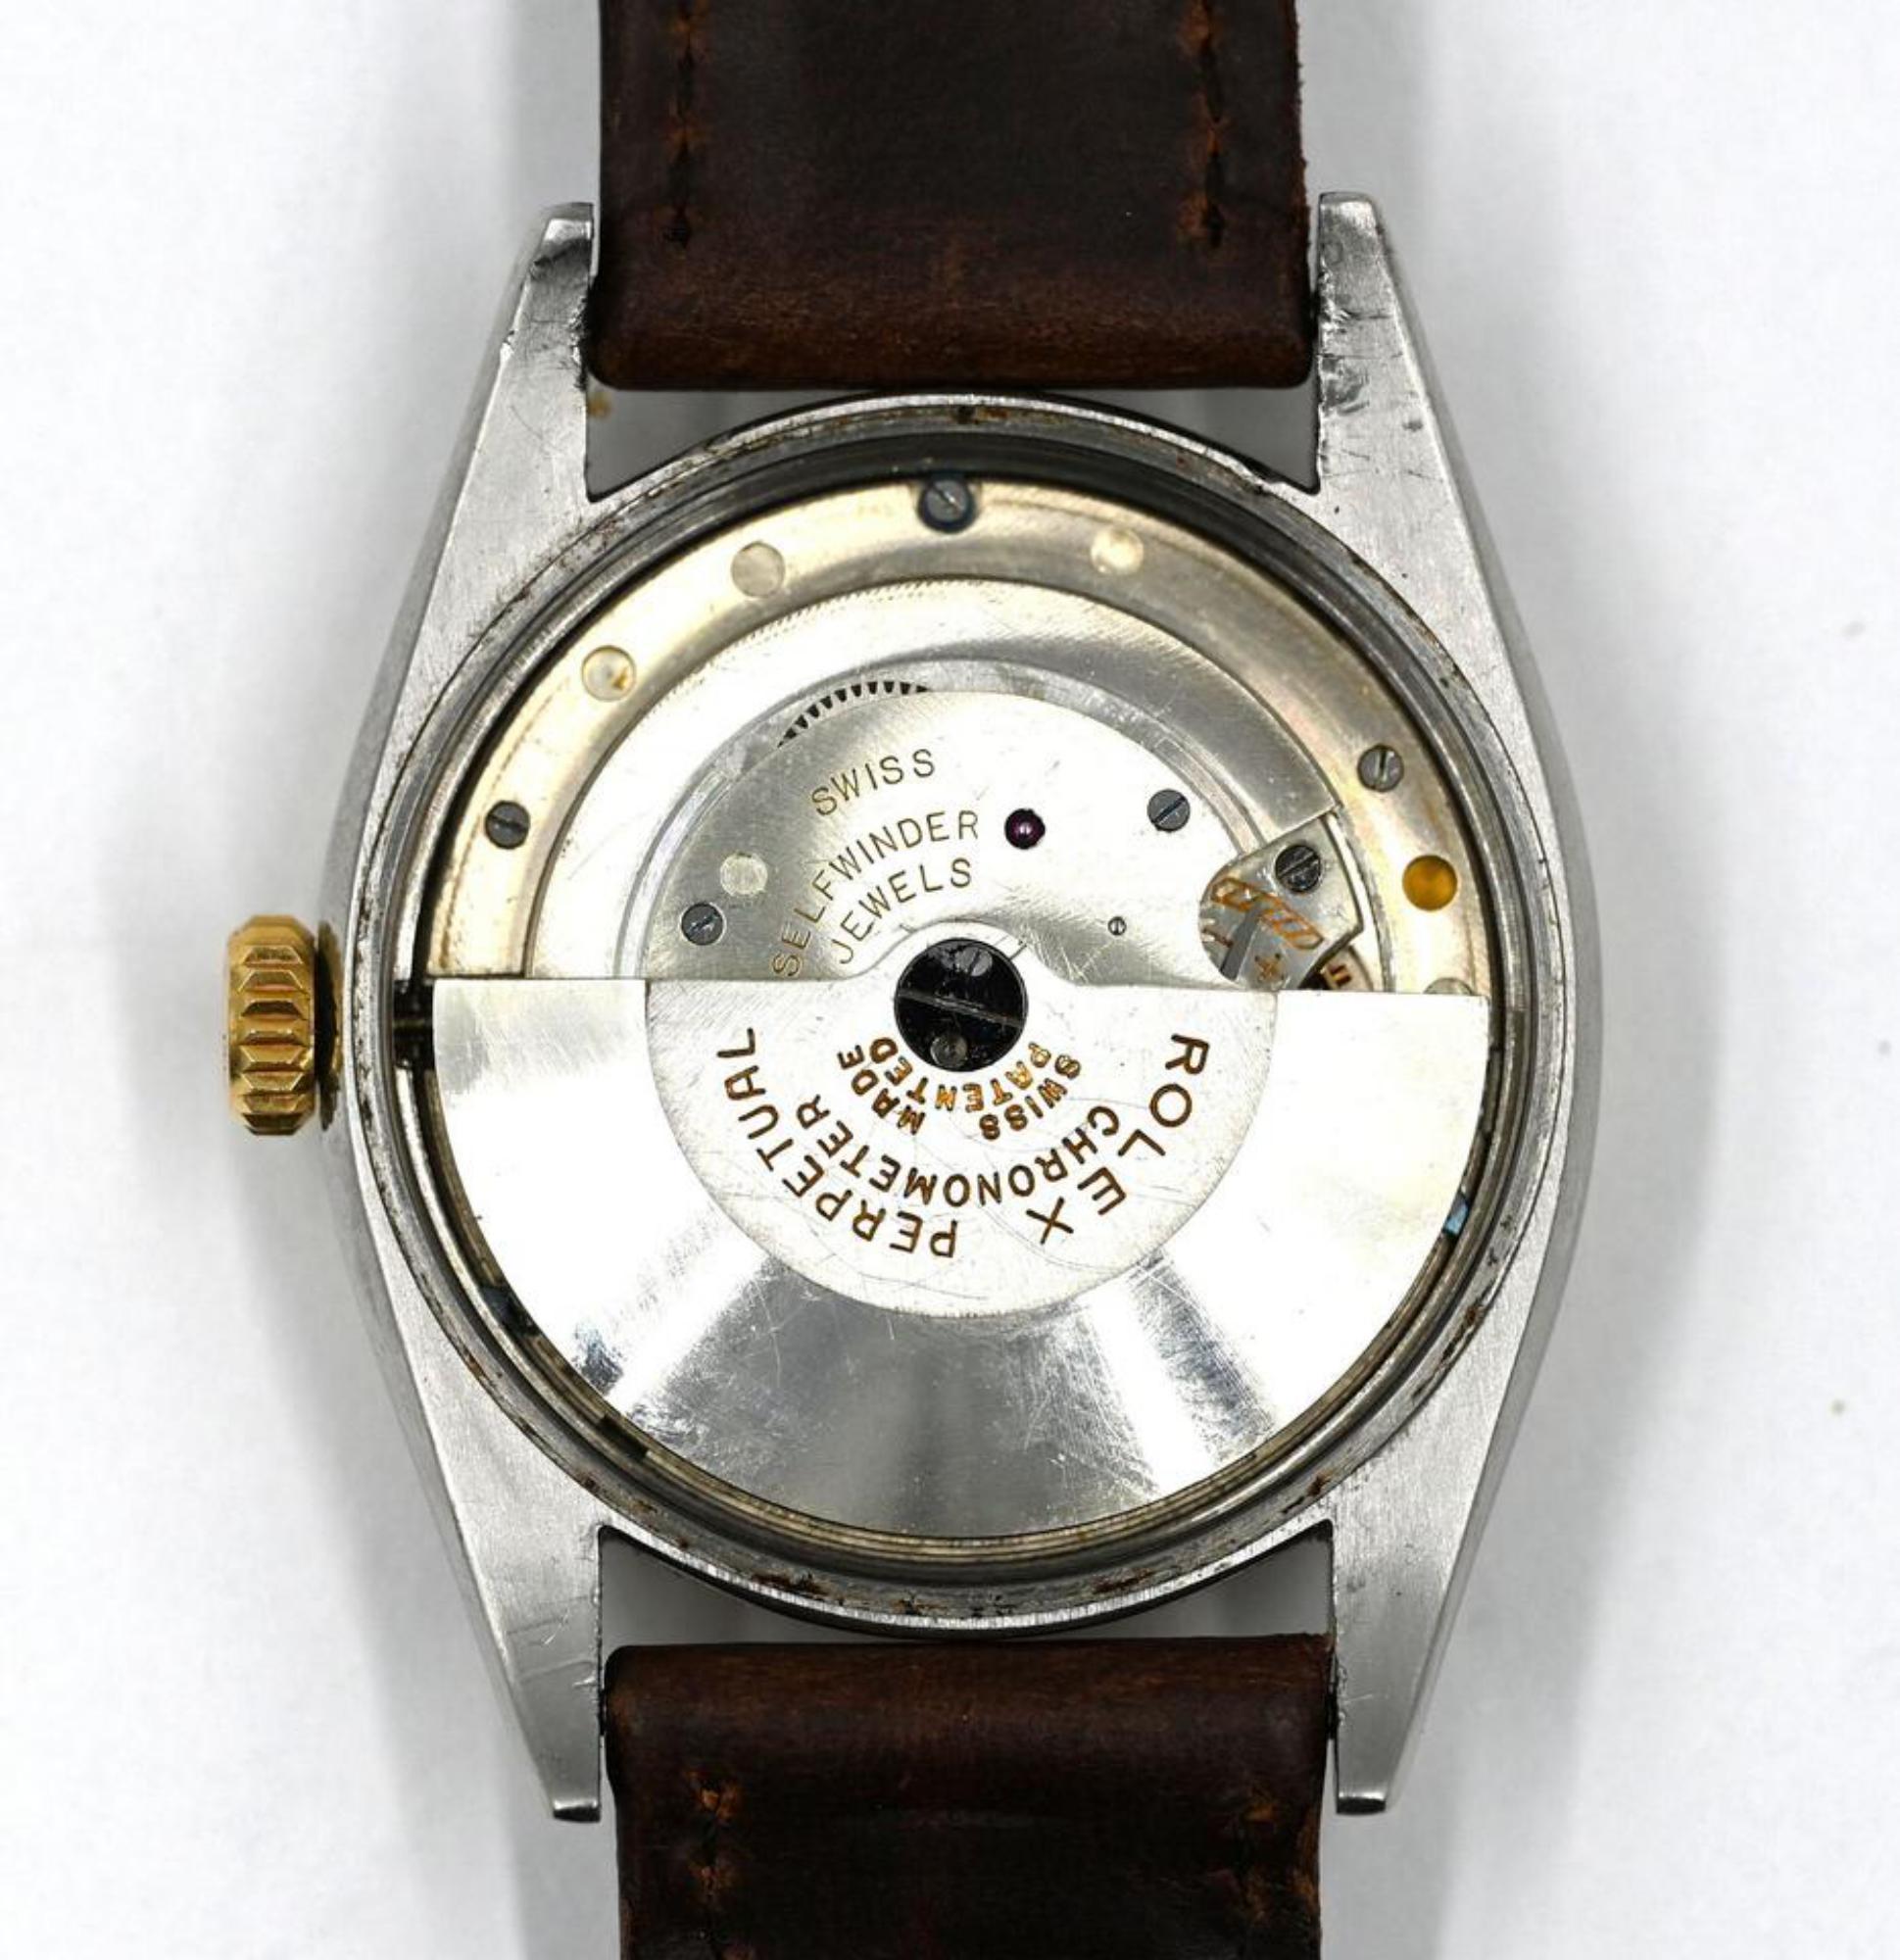 Rolex c1953 14k Oyster Perpetual Datejust Ref 6105 Bubble Back Watch 16r222s For Sale 1